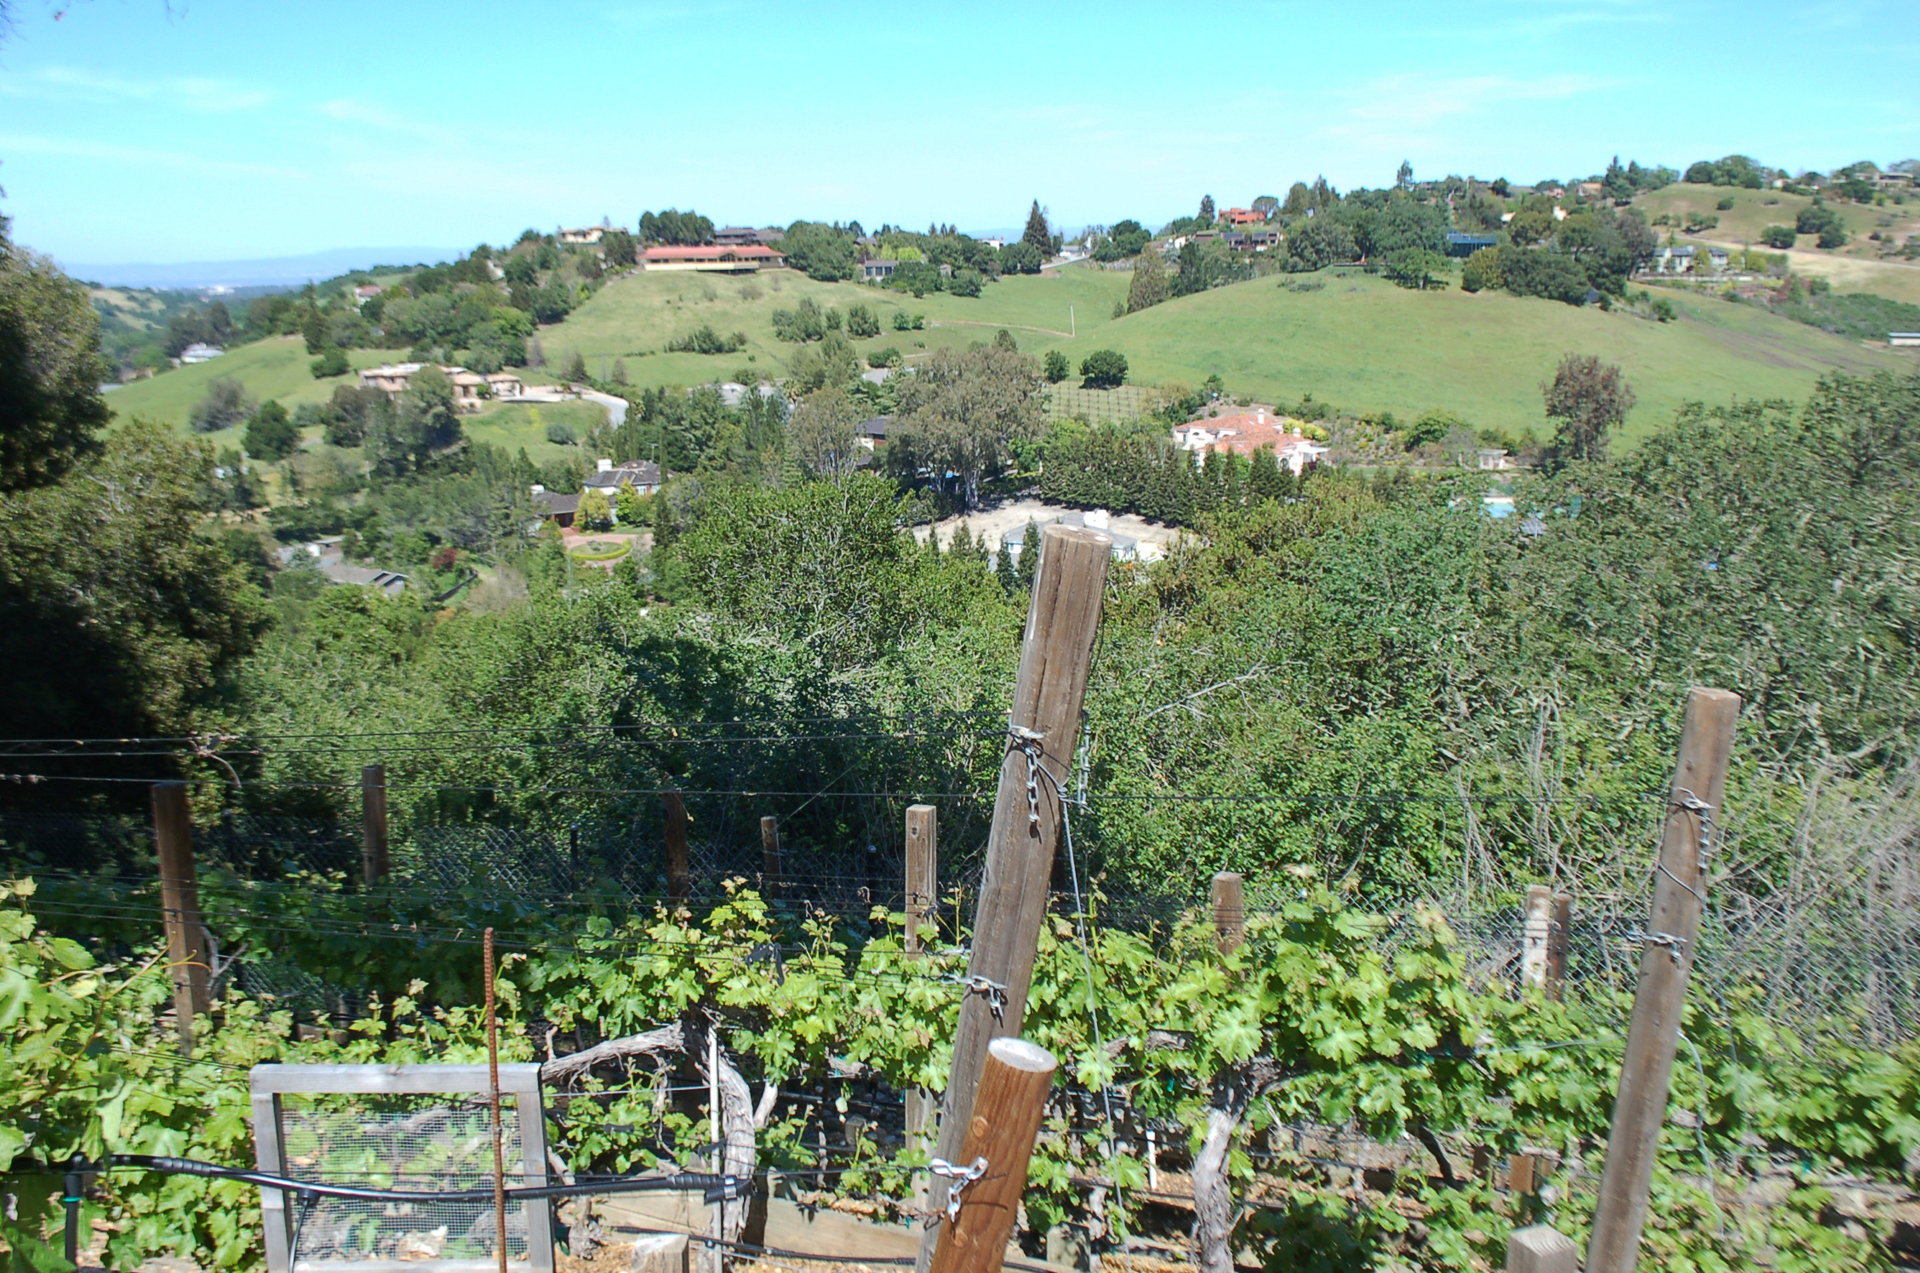 Scott Bryan's 300 vines and five varietals in Los Altos Hills overlooks some neighboring wine estates in this town where vineyards are booming.